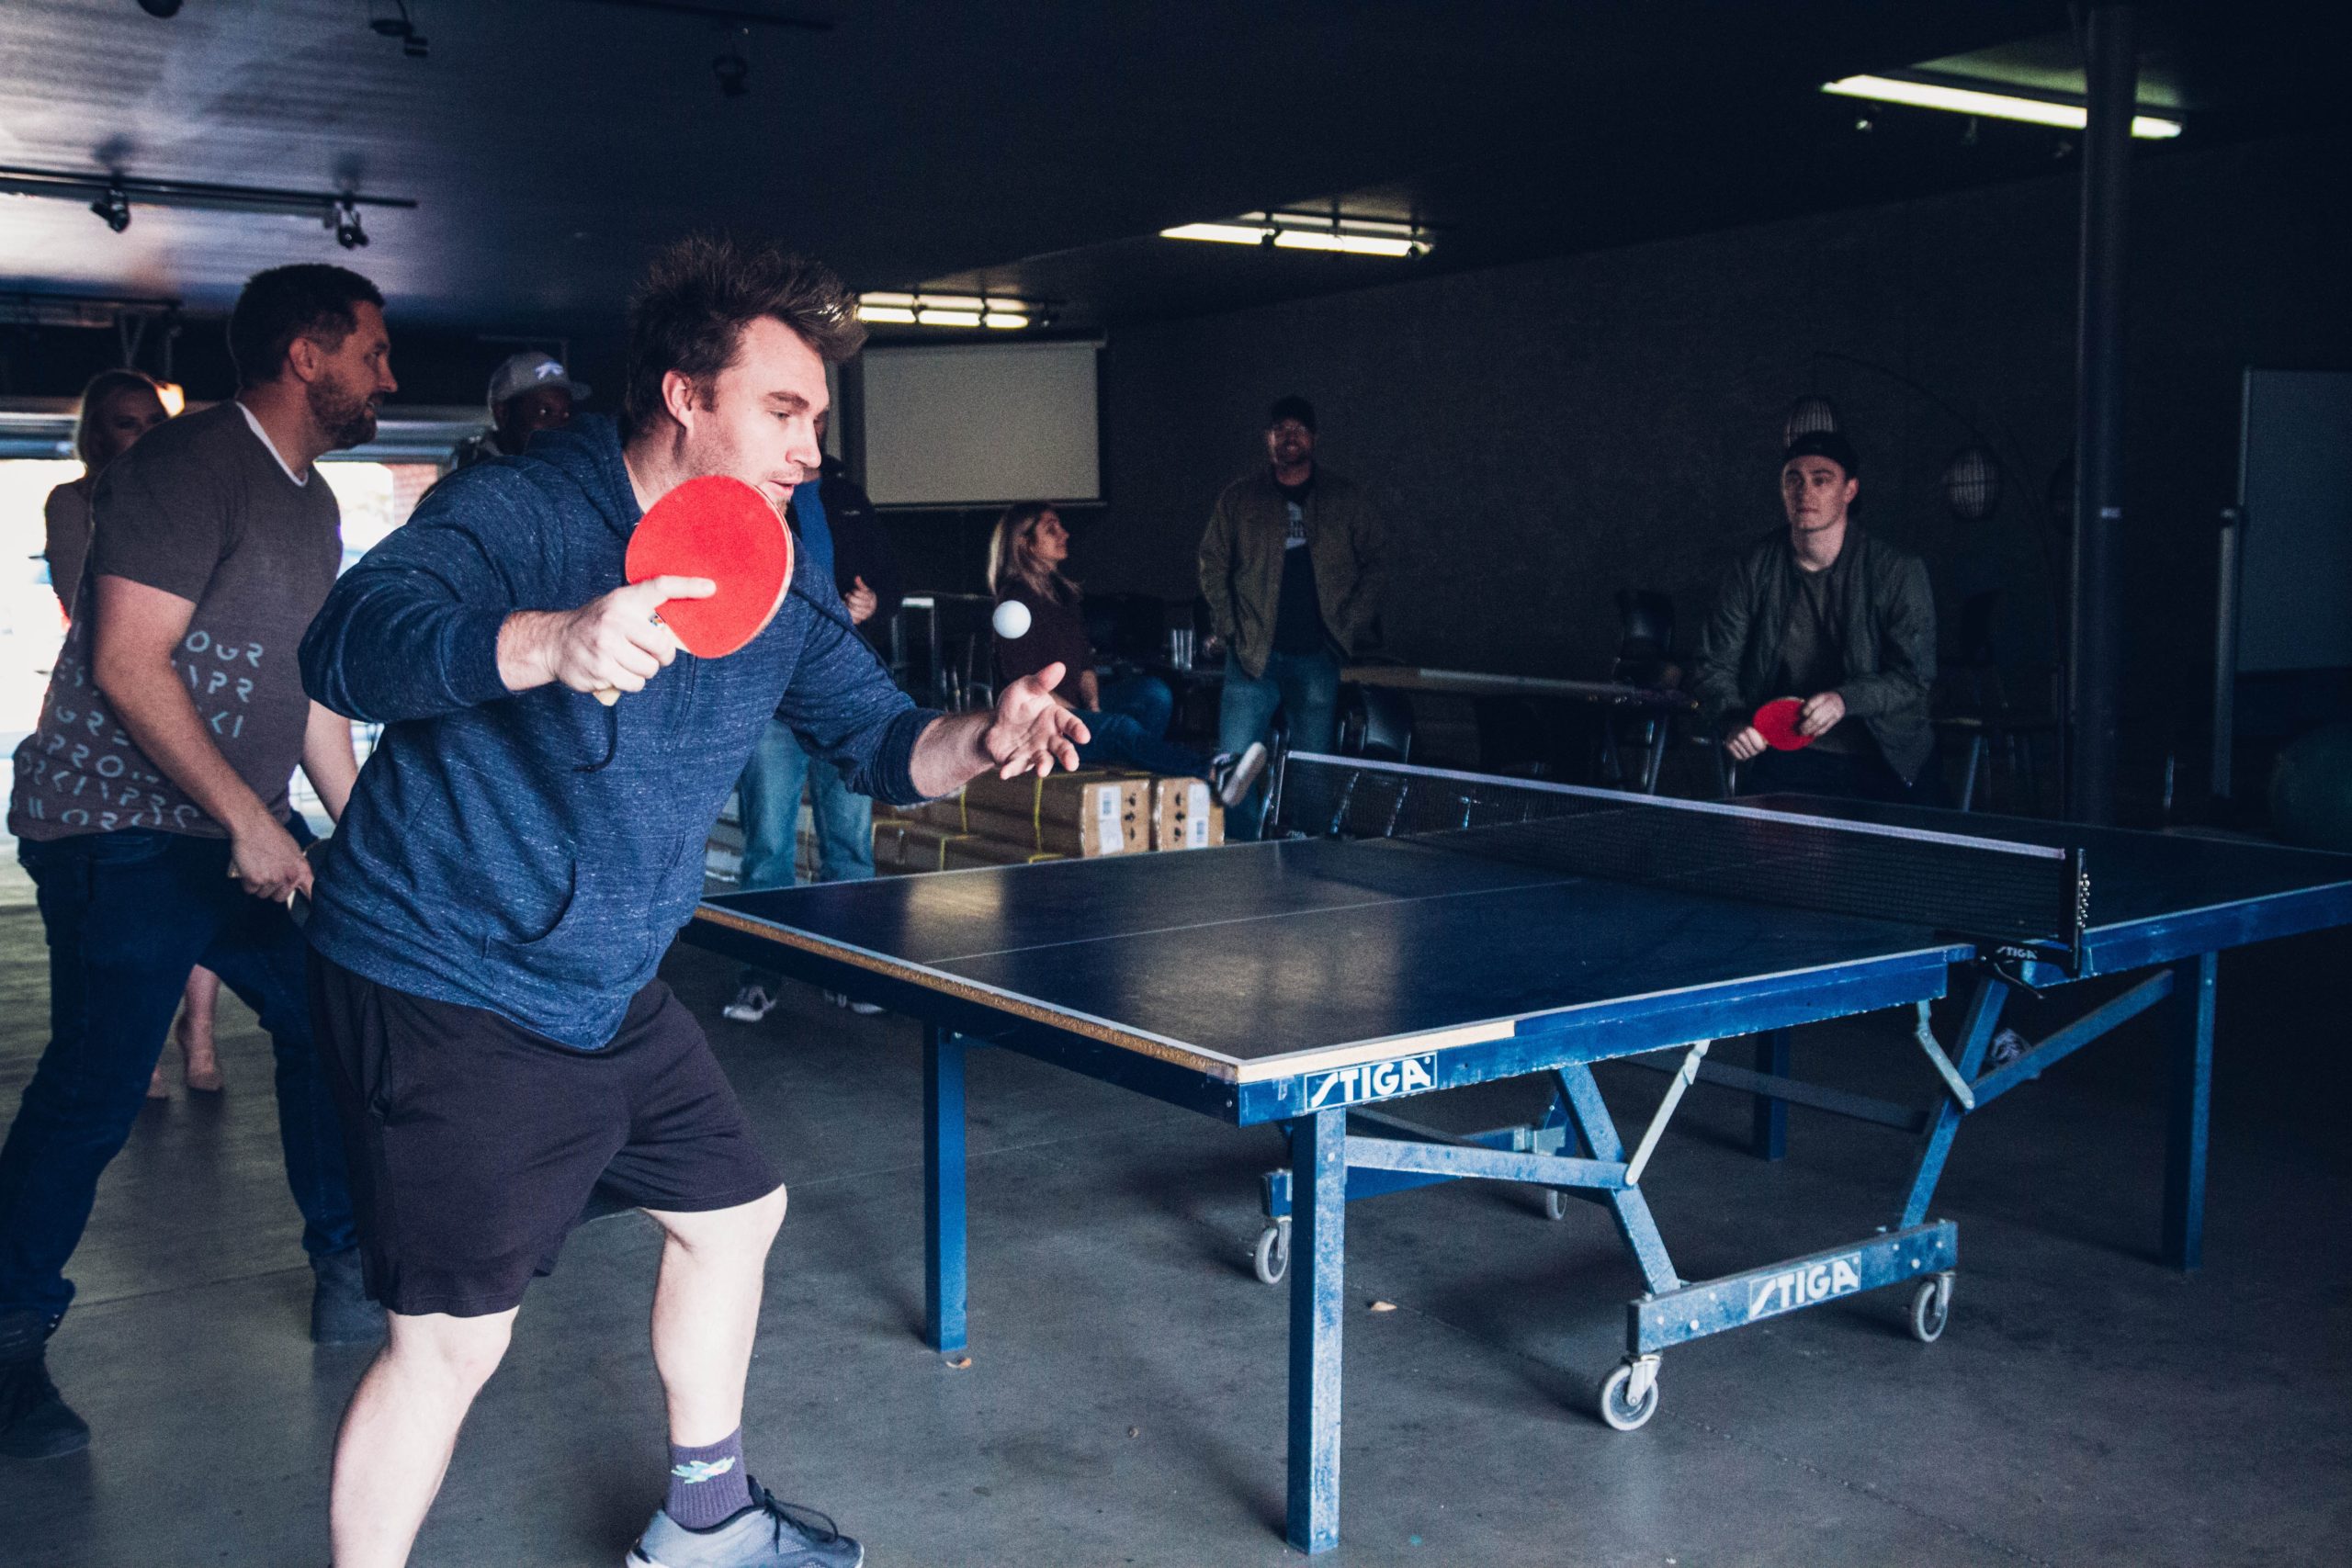 An Image of A Ping Pong tournament